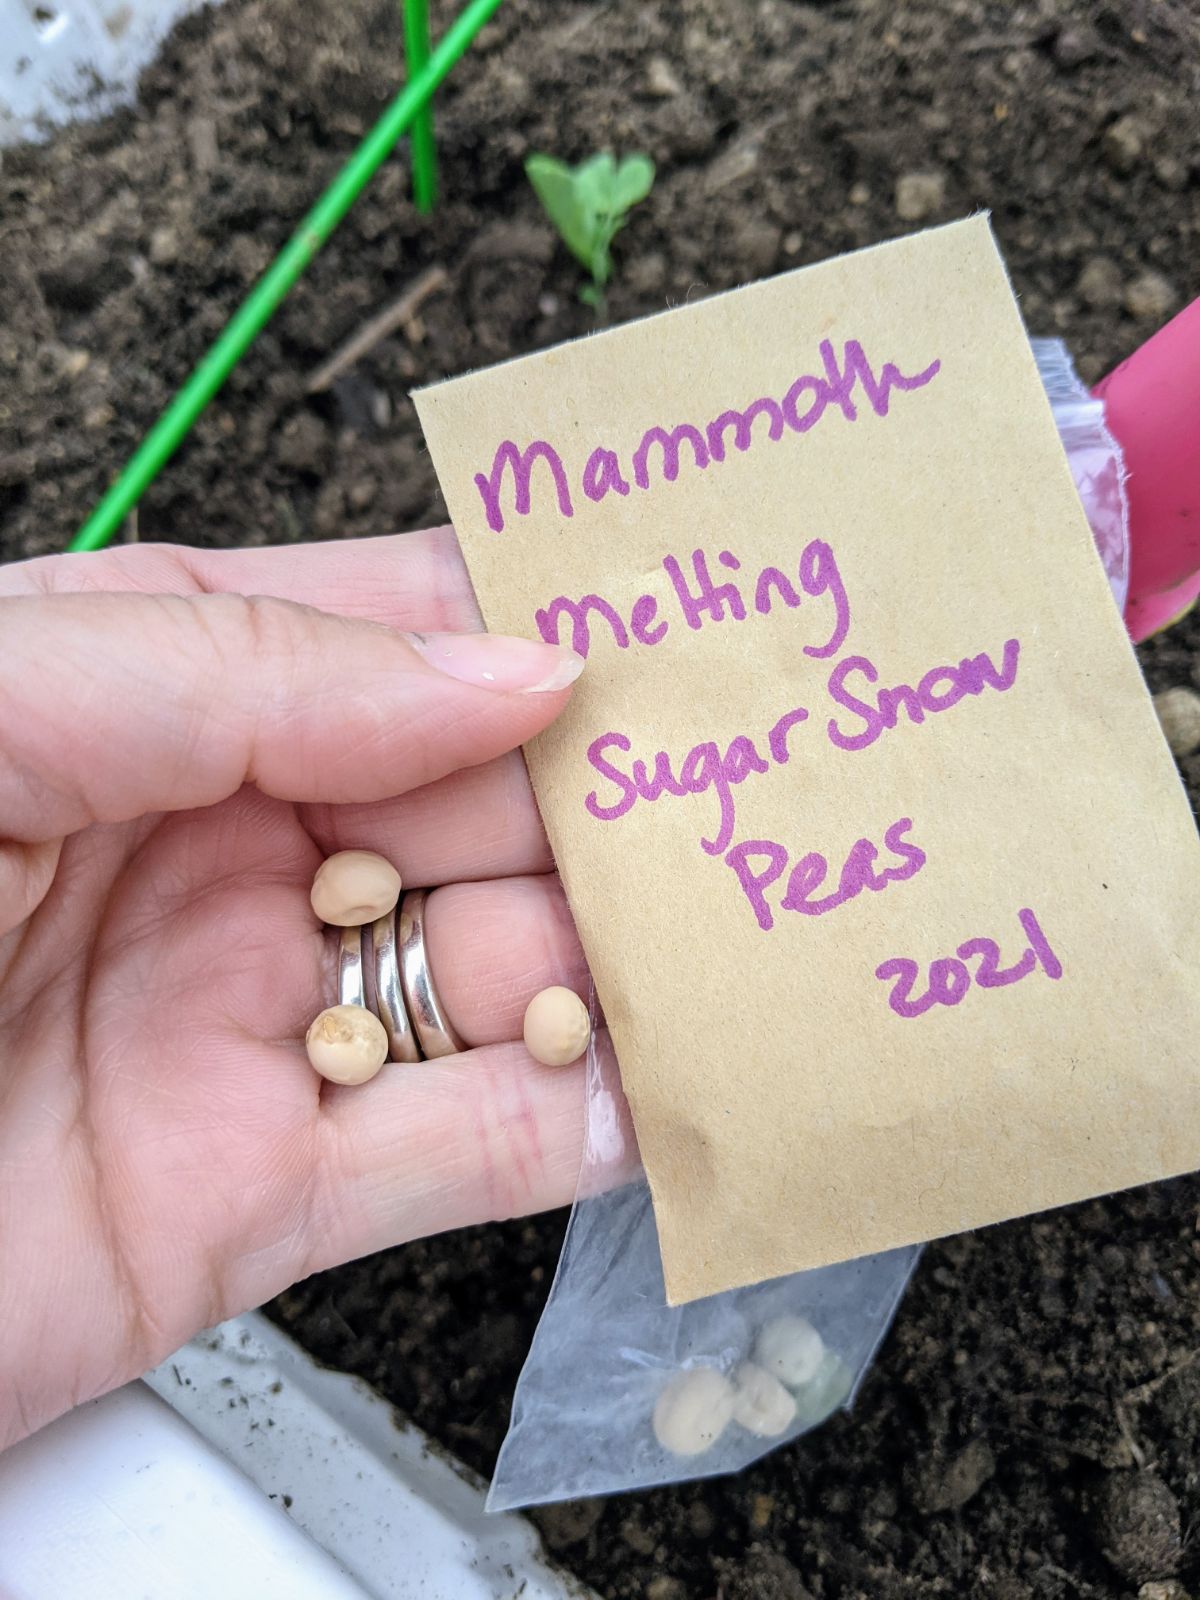 Direct Sowing Mammoth Melting Snow pea seeds 